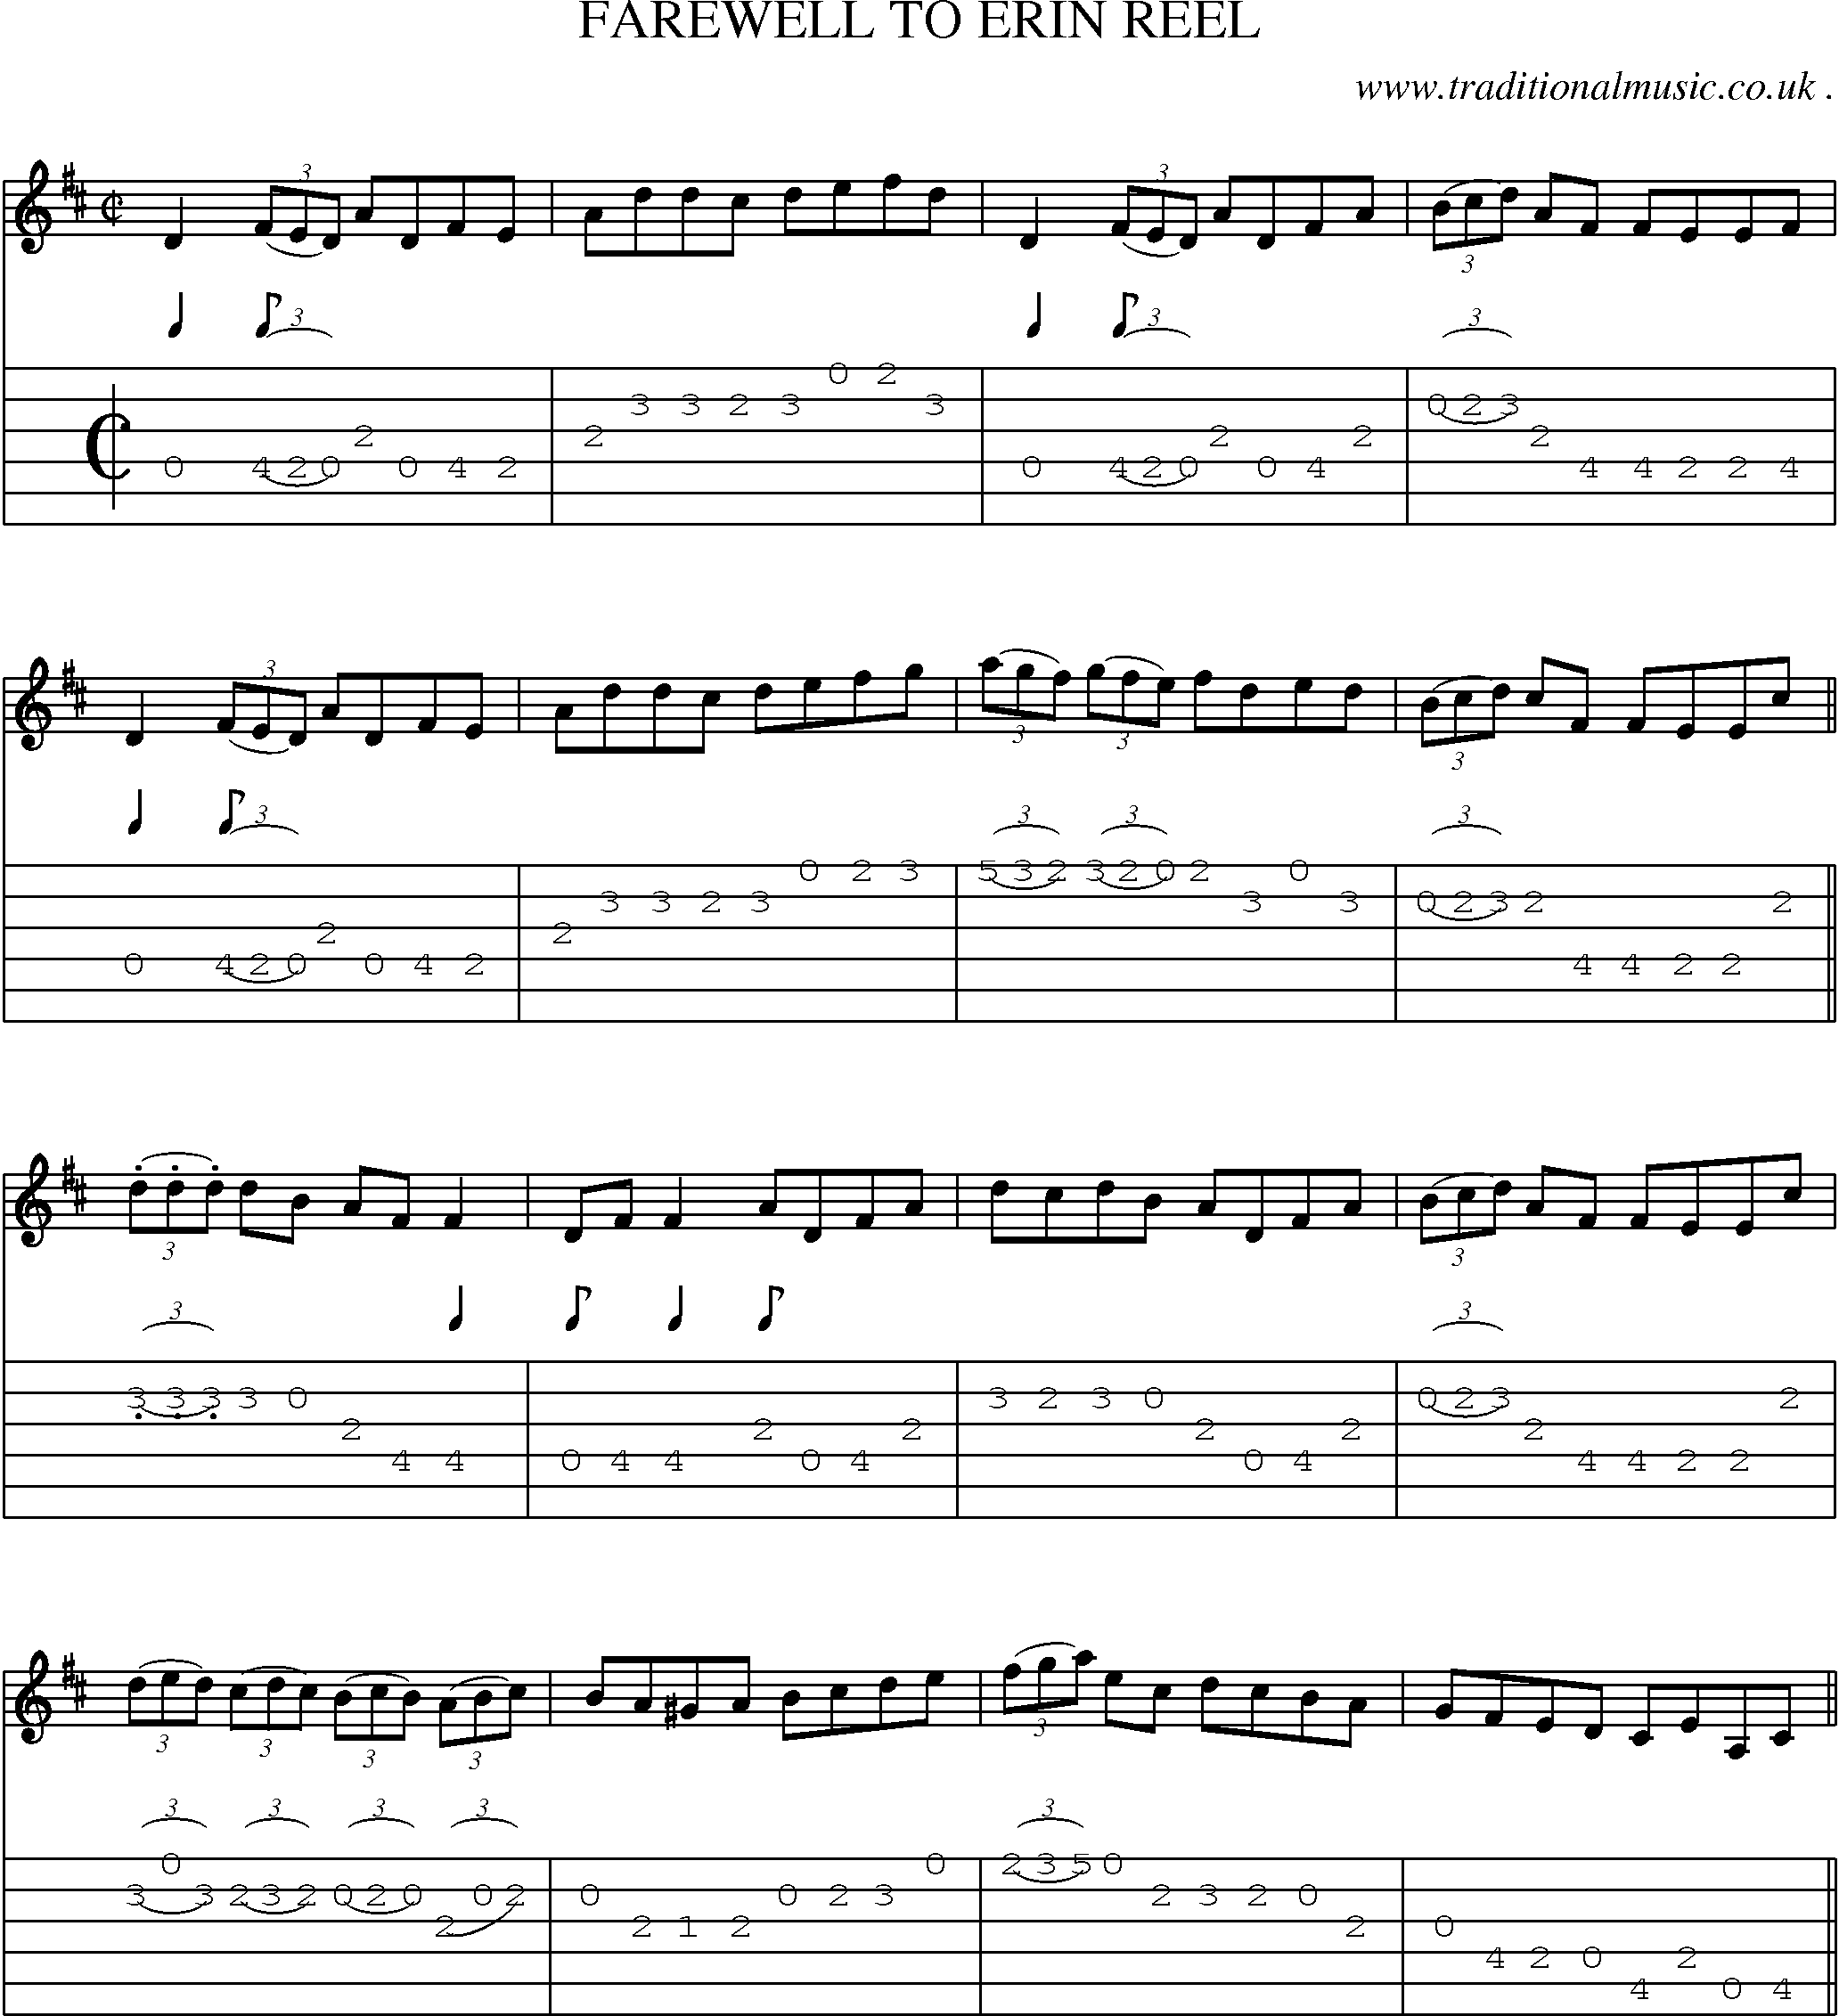 Sheet-Music and Guitar Tabs for Farewell To Erin Reel